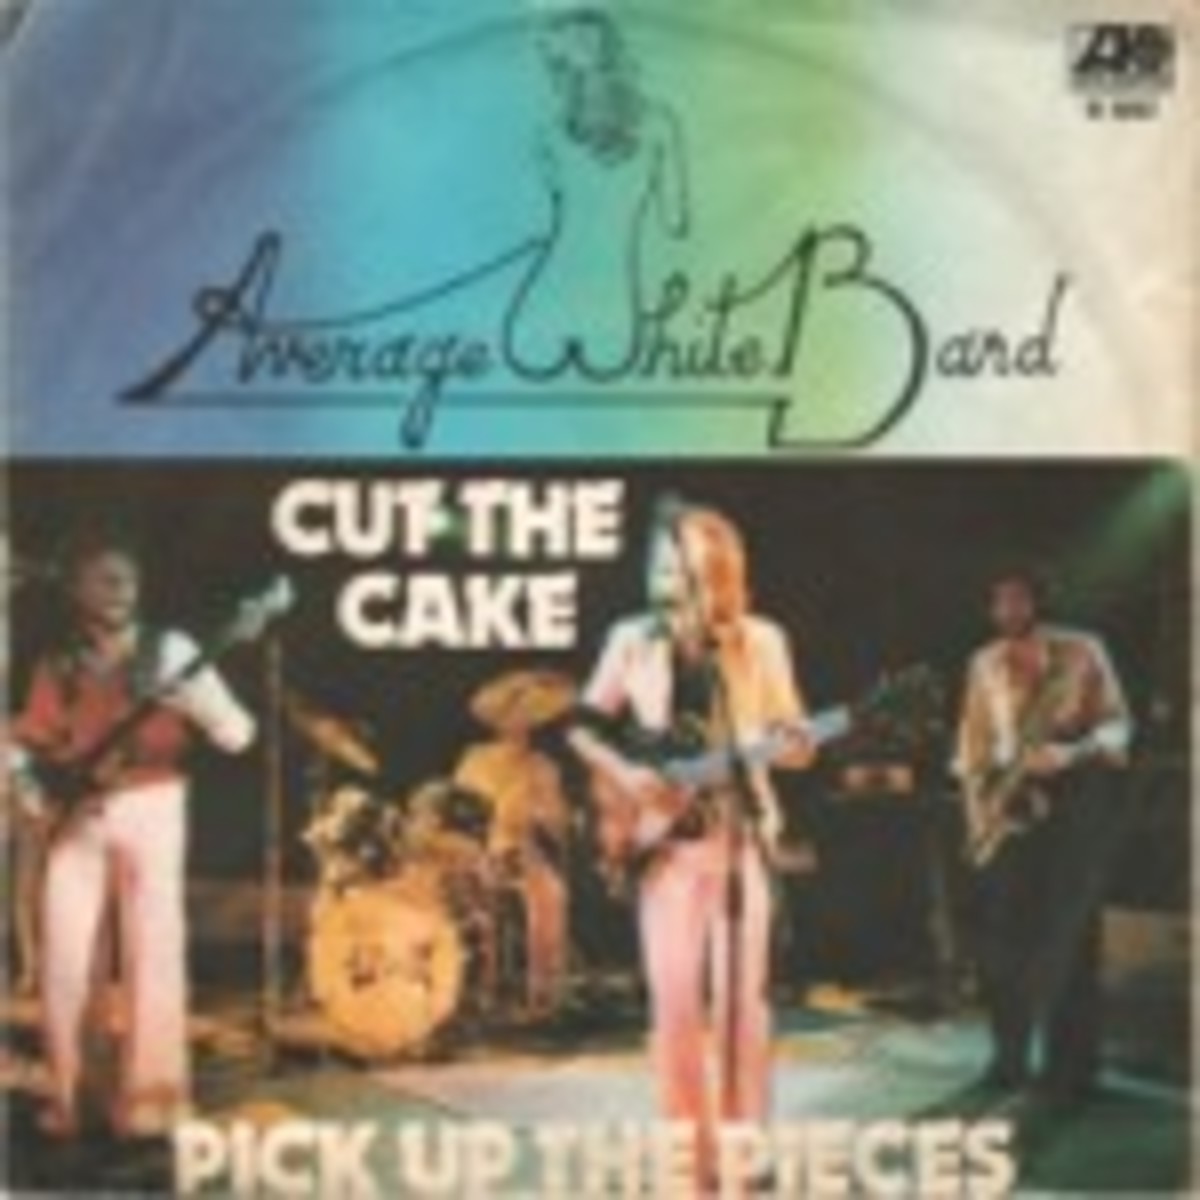 Average White Band Pick Up The Pieces